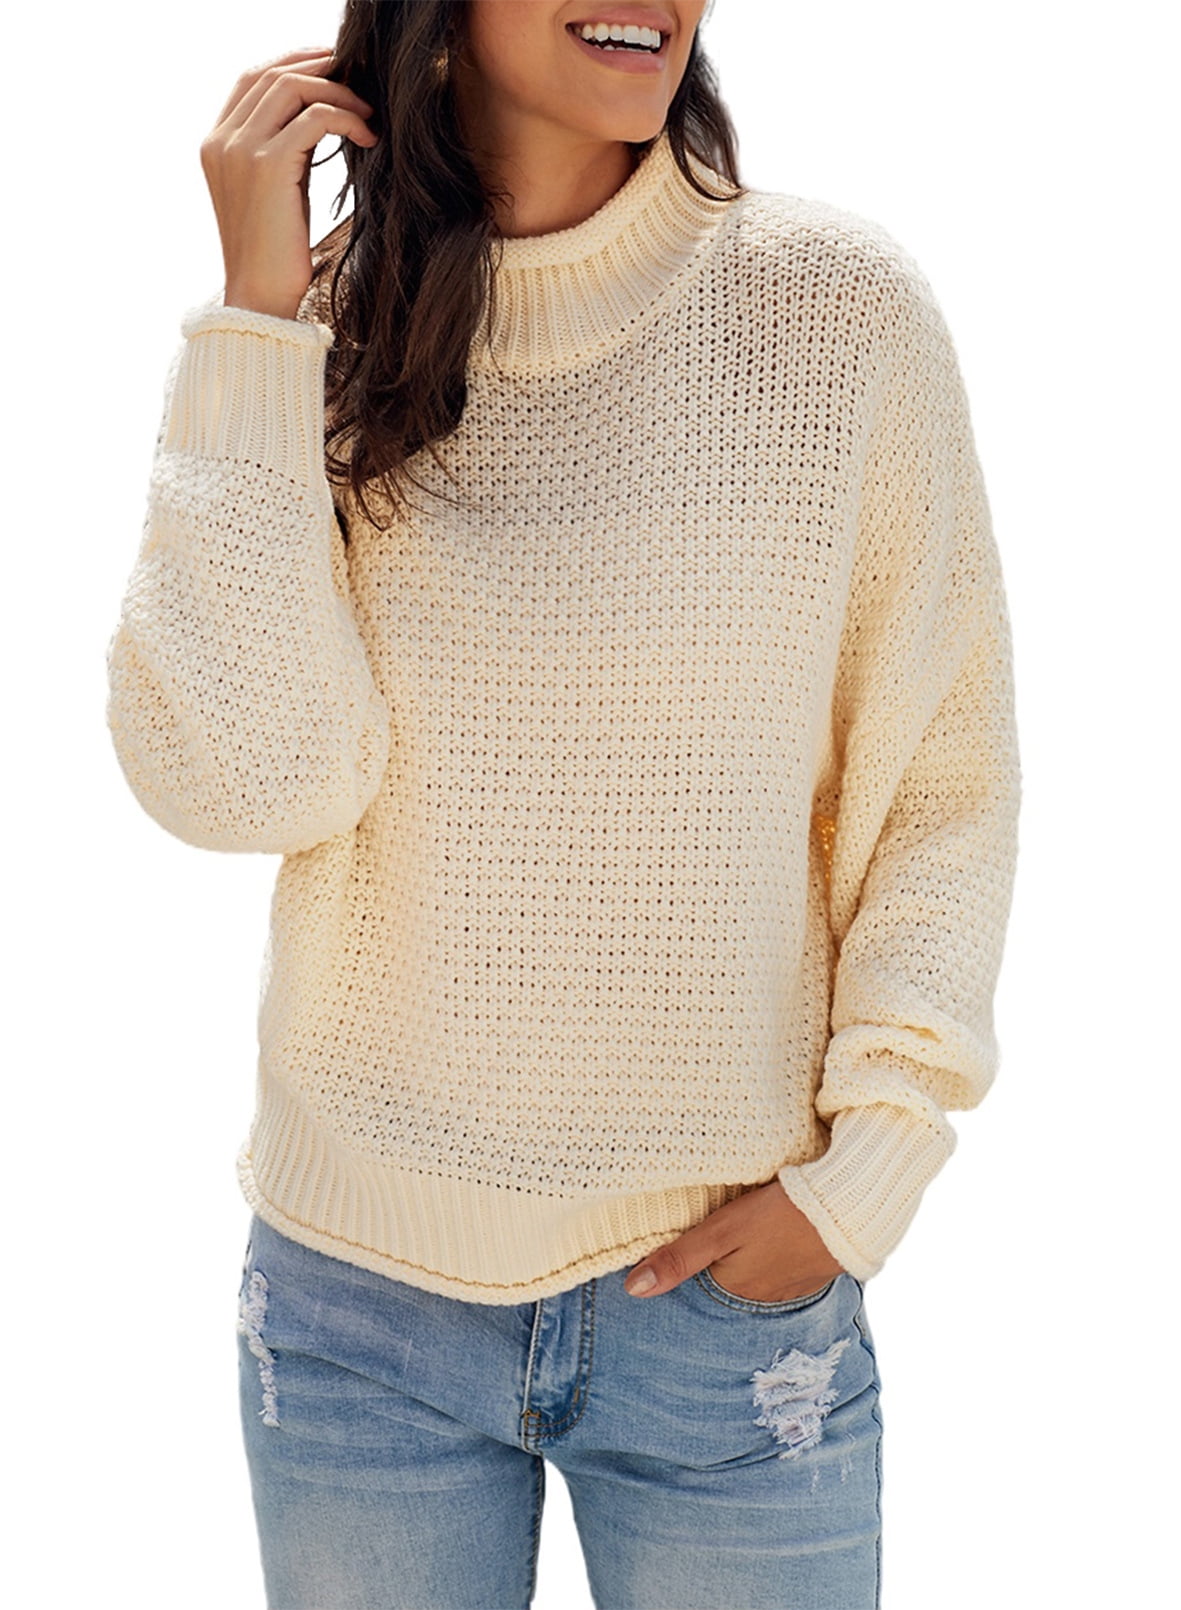 Aleumdr Womens Chunky Turtleneck Sweaters Long Sleeve Batwing Pullover ...